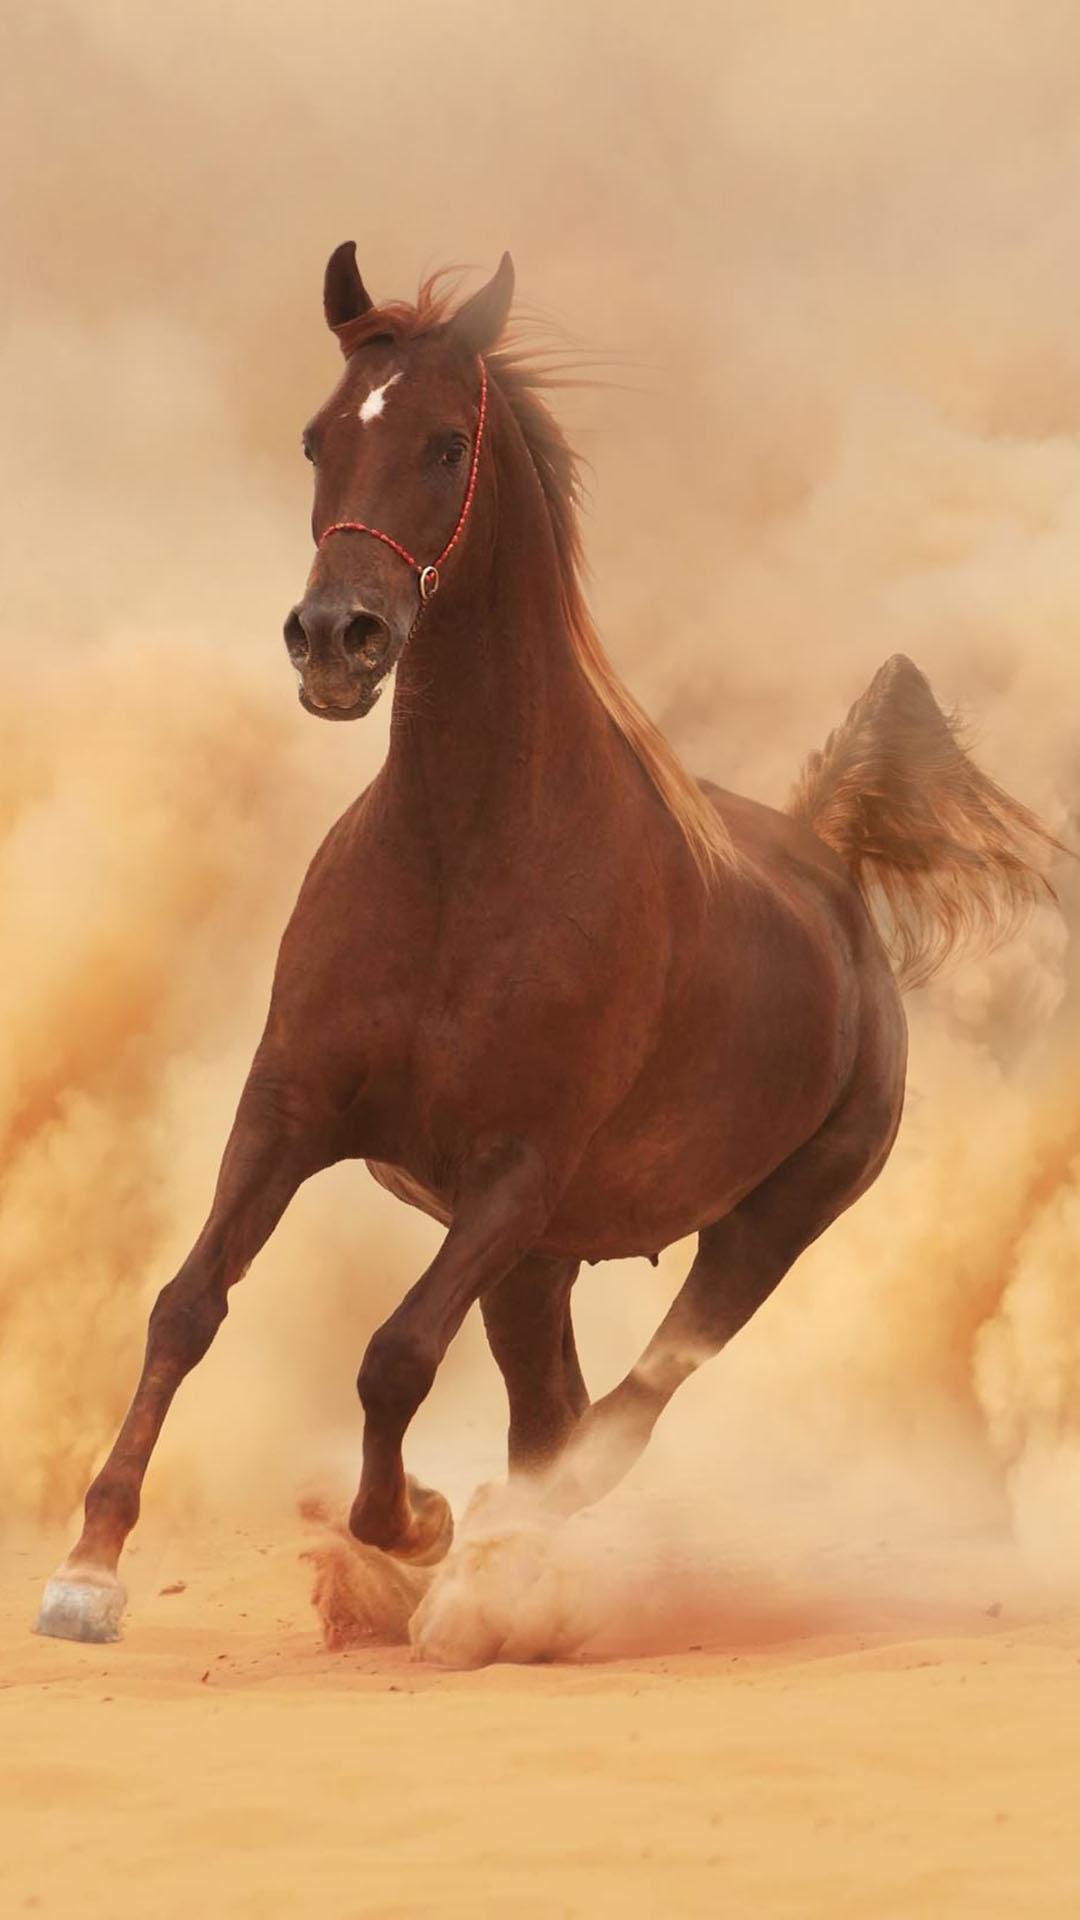 Running horse mobile Wallpapers Download | MobCup